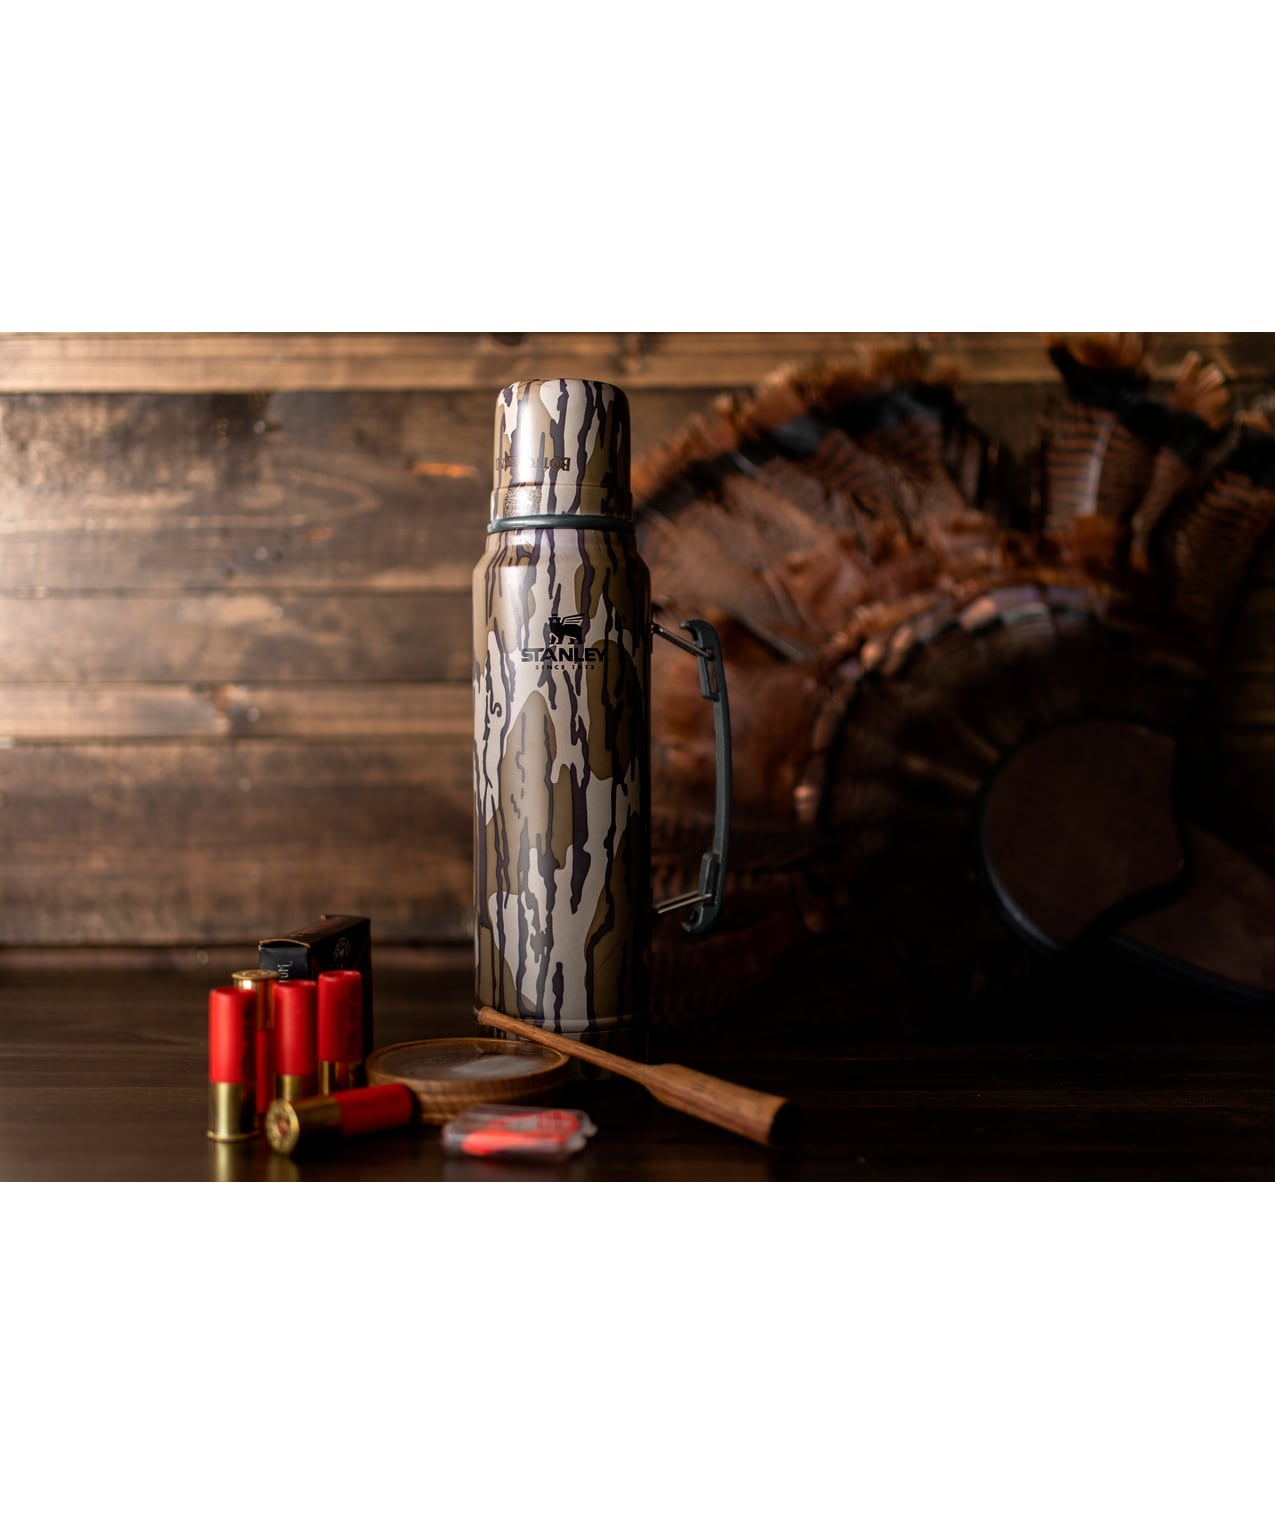 Mossy Oak Stanley Thermos Bottle, Travel Mug, and Flask: Legendary Camo  Patterns on Legendary Drinkware - Wide Open Spaces